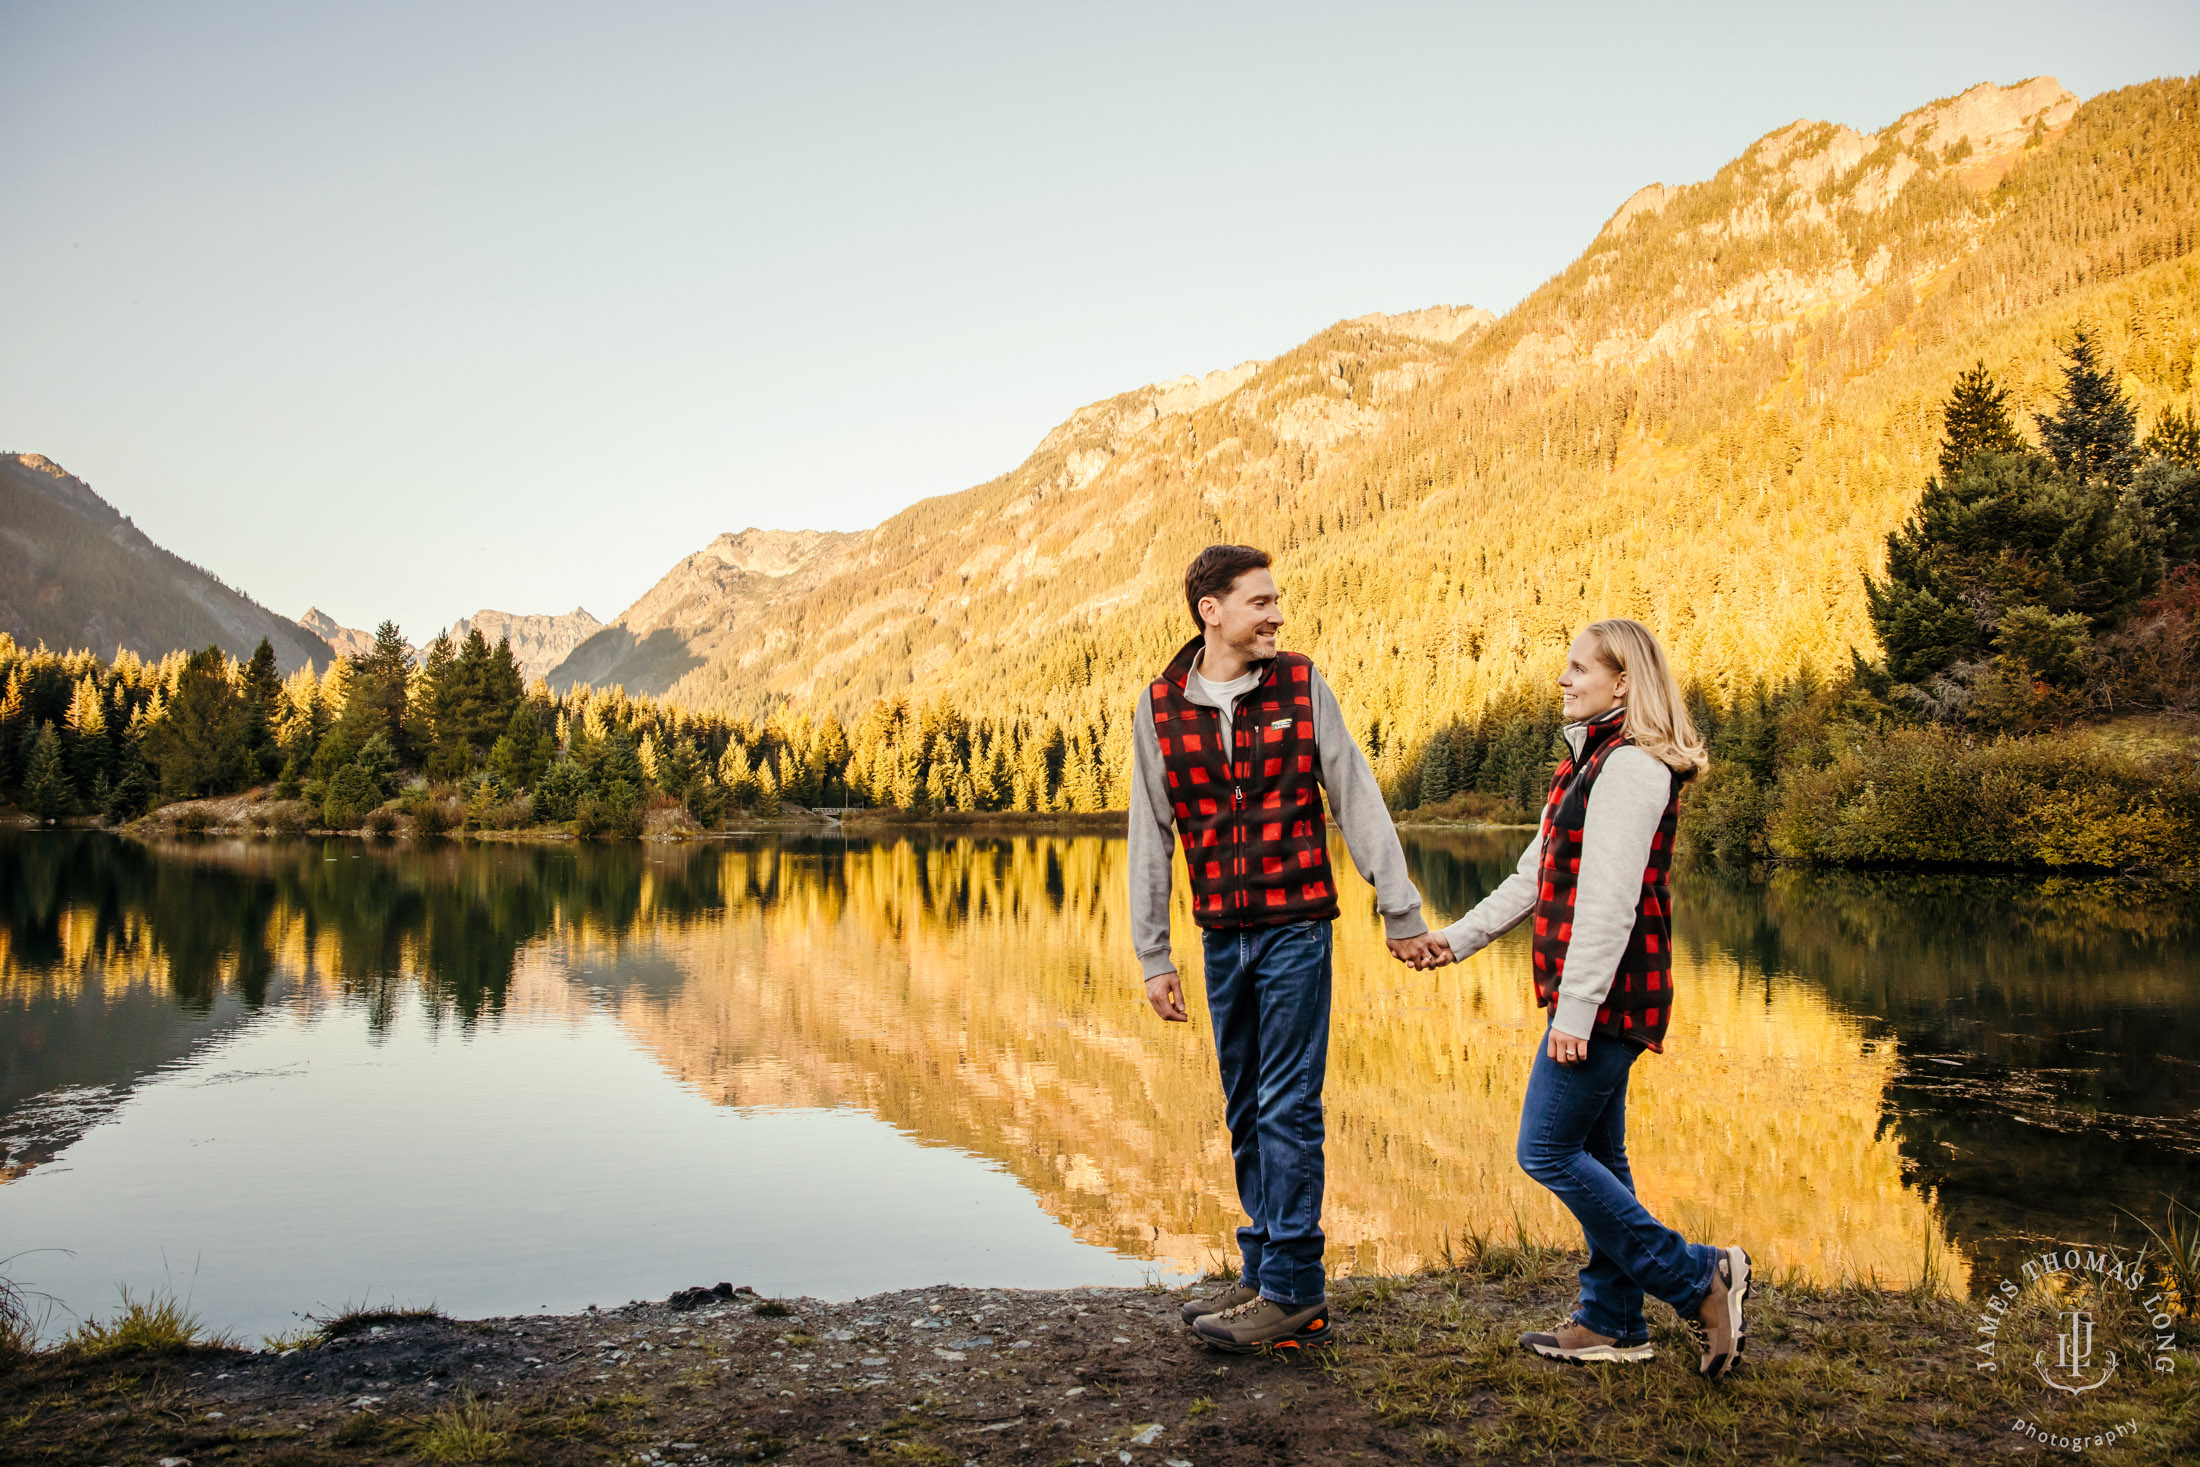 Snoqualmie Pass family photography session by Snoqualmie family photographer James Thomas Long Photography